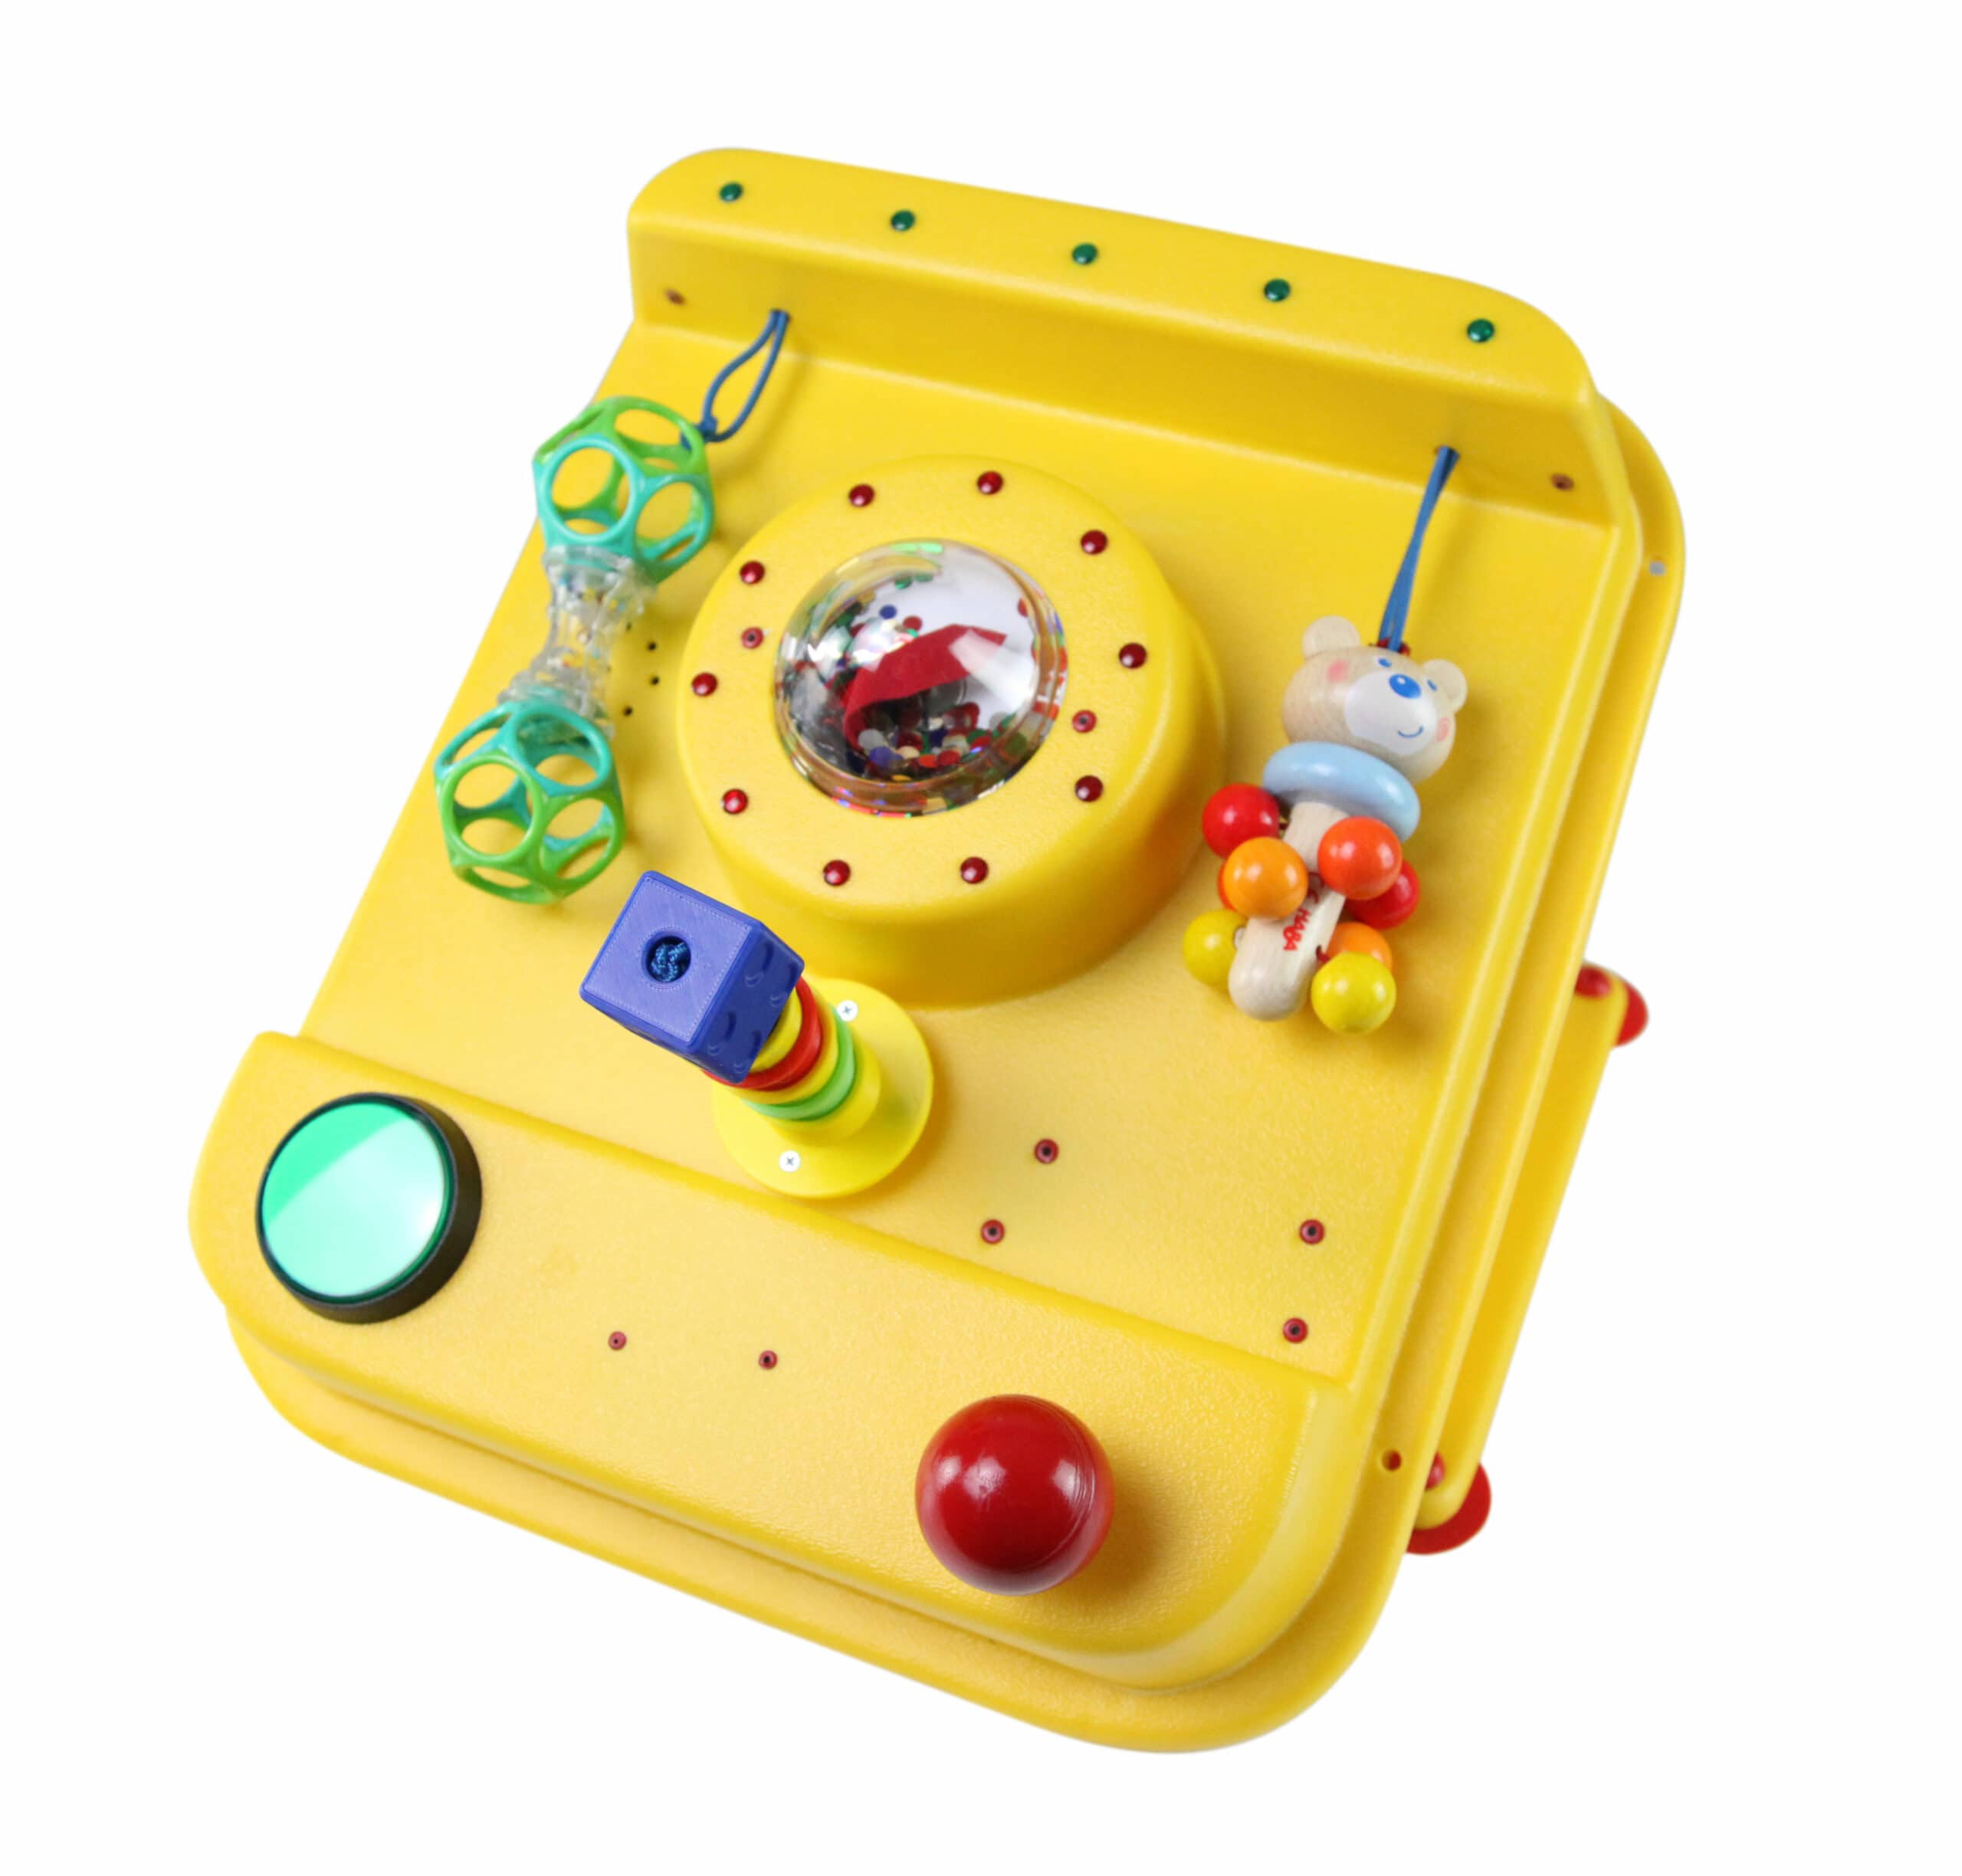 Yellow therapeutic manipulator toy with attachments.